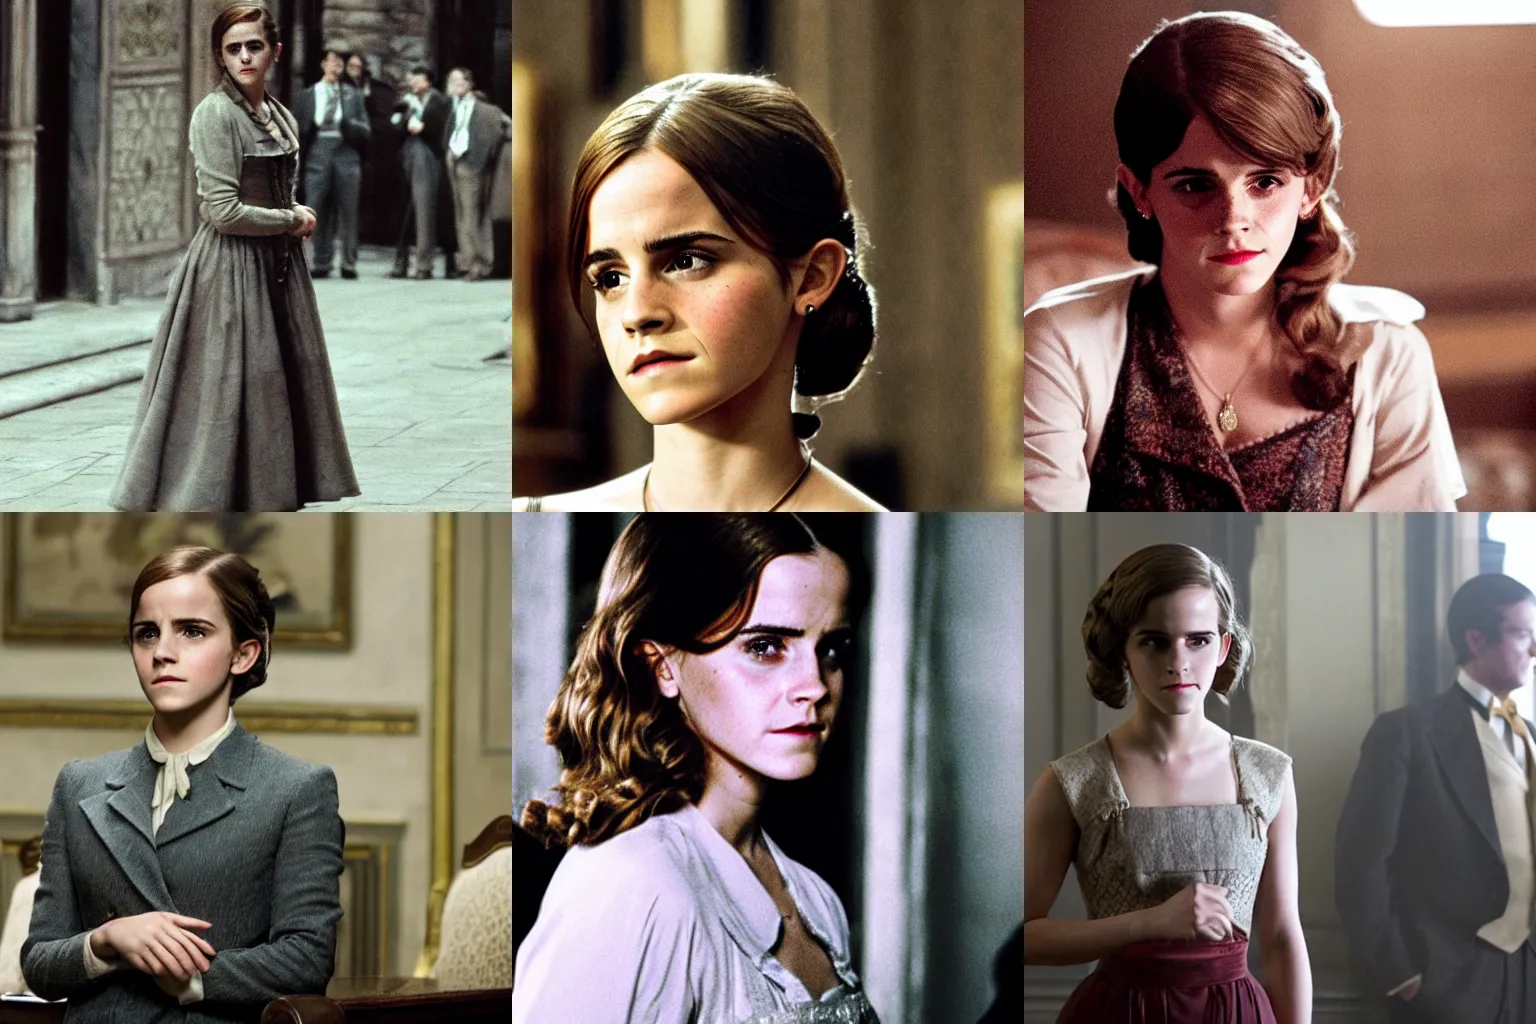 Prompt: Movie still of Emma Watson in The Godfather